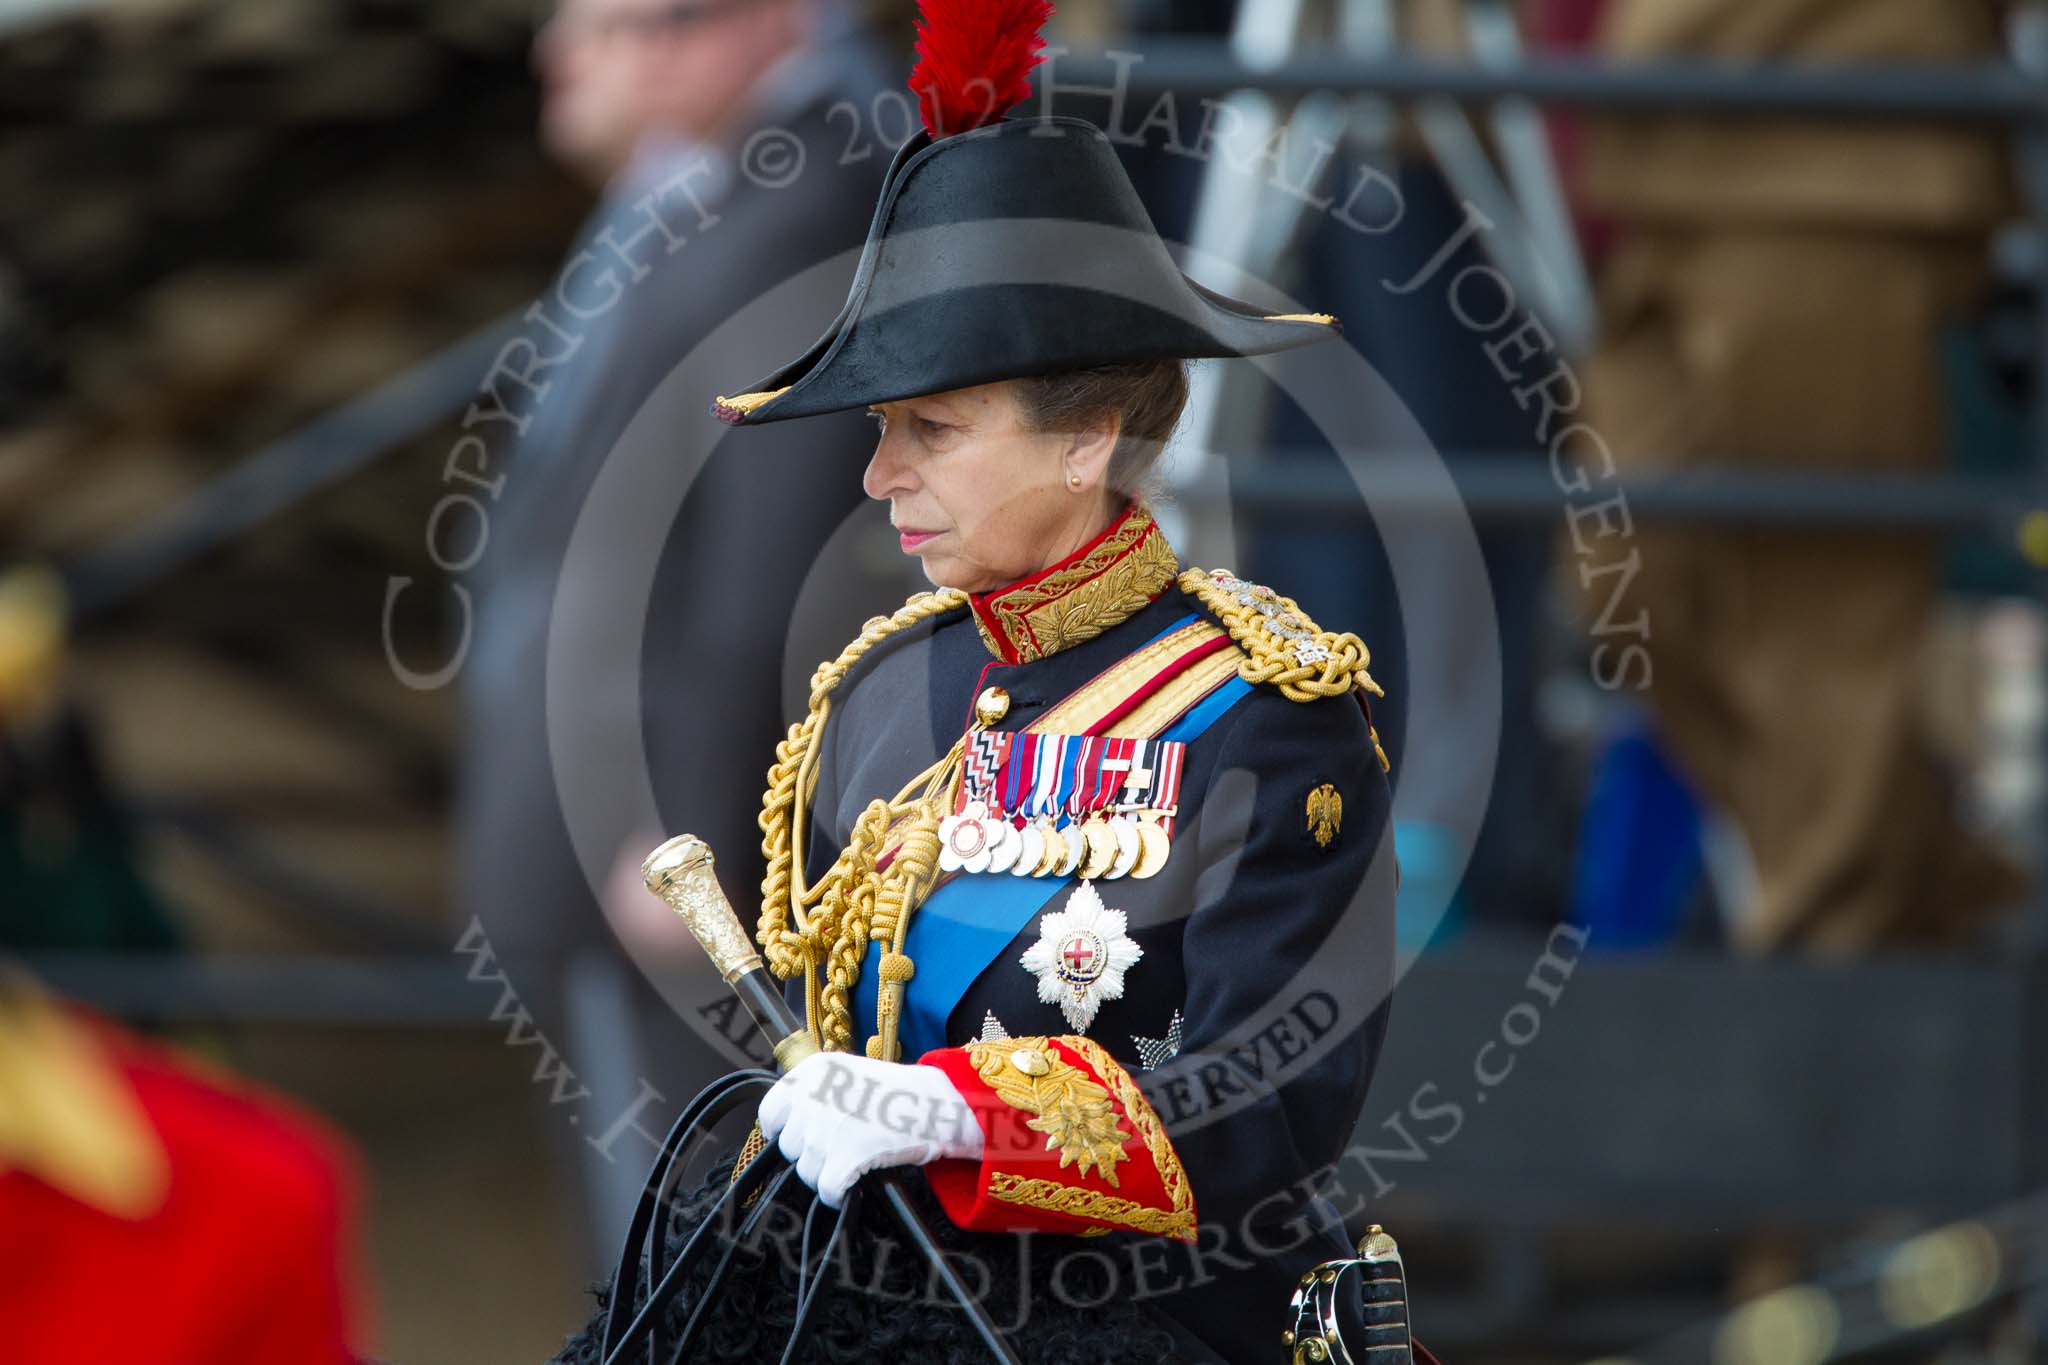 Trooping the Colour 2012: Her Royal Highness The Princess Royal, Gold Stick in Waiting and Colonel The Blues and Royals (Royal Horse Guards and 1st Dragoons)..
Horse Guards Parade, Westminster,
London SW1,

United Kingdom,
on 16 June 2012 at 10:59, image #172